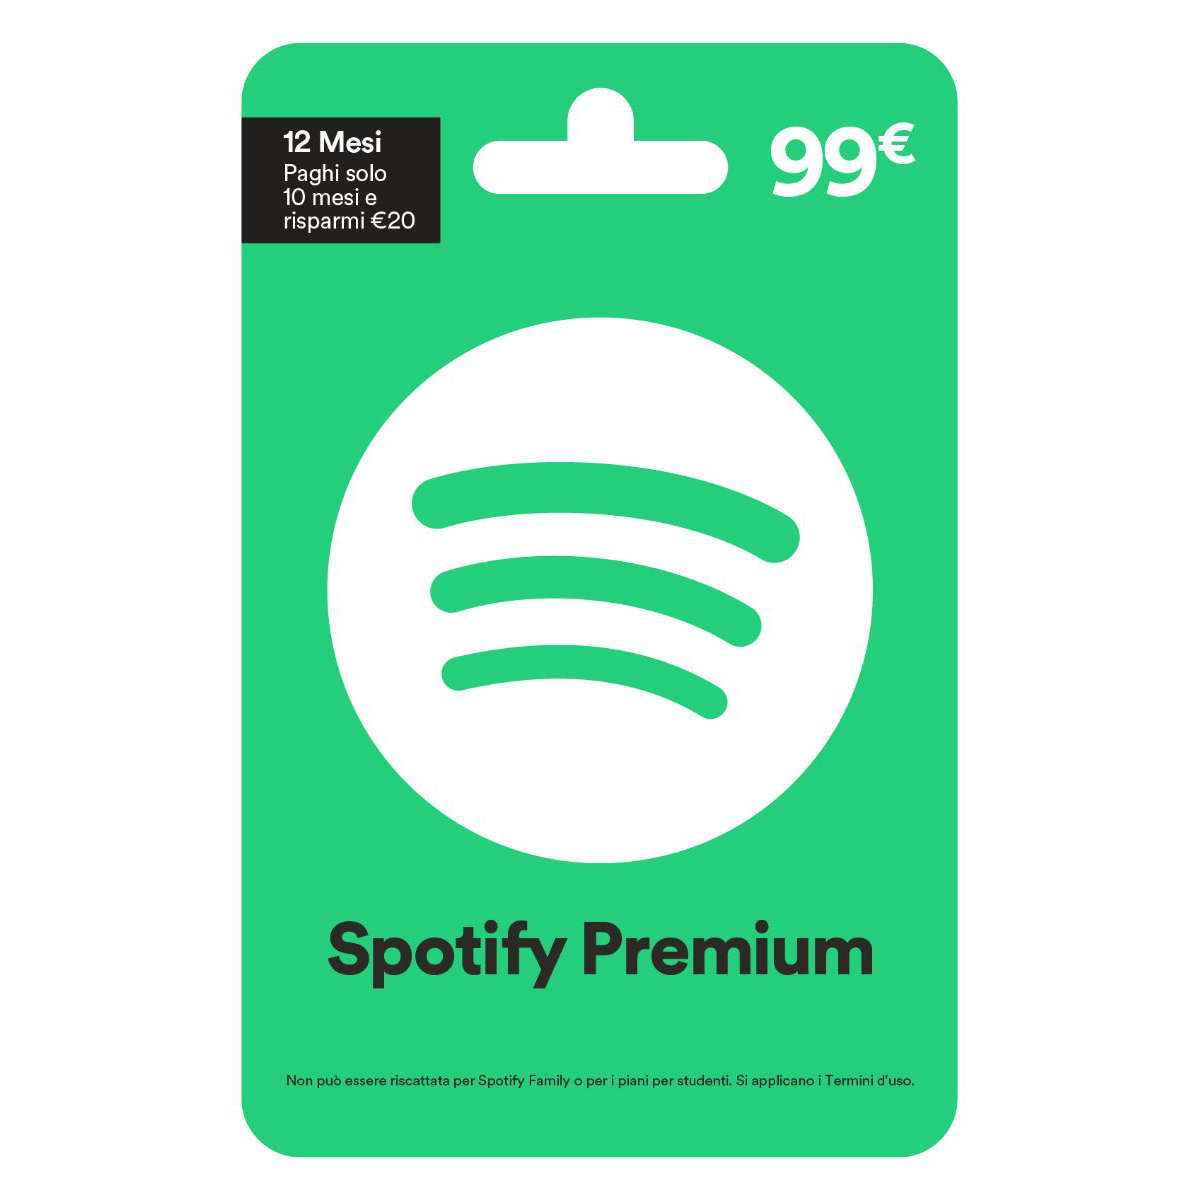 spotify gift card online